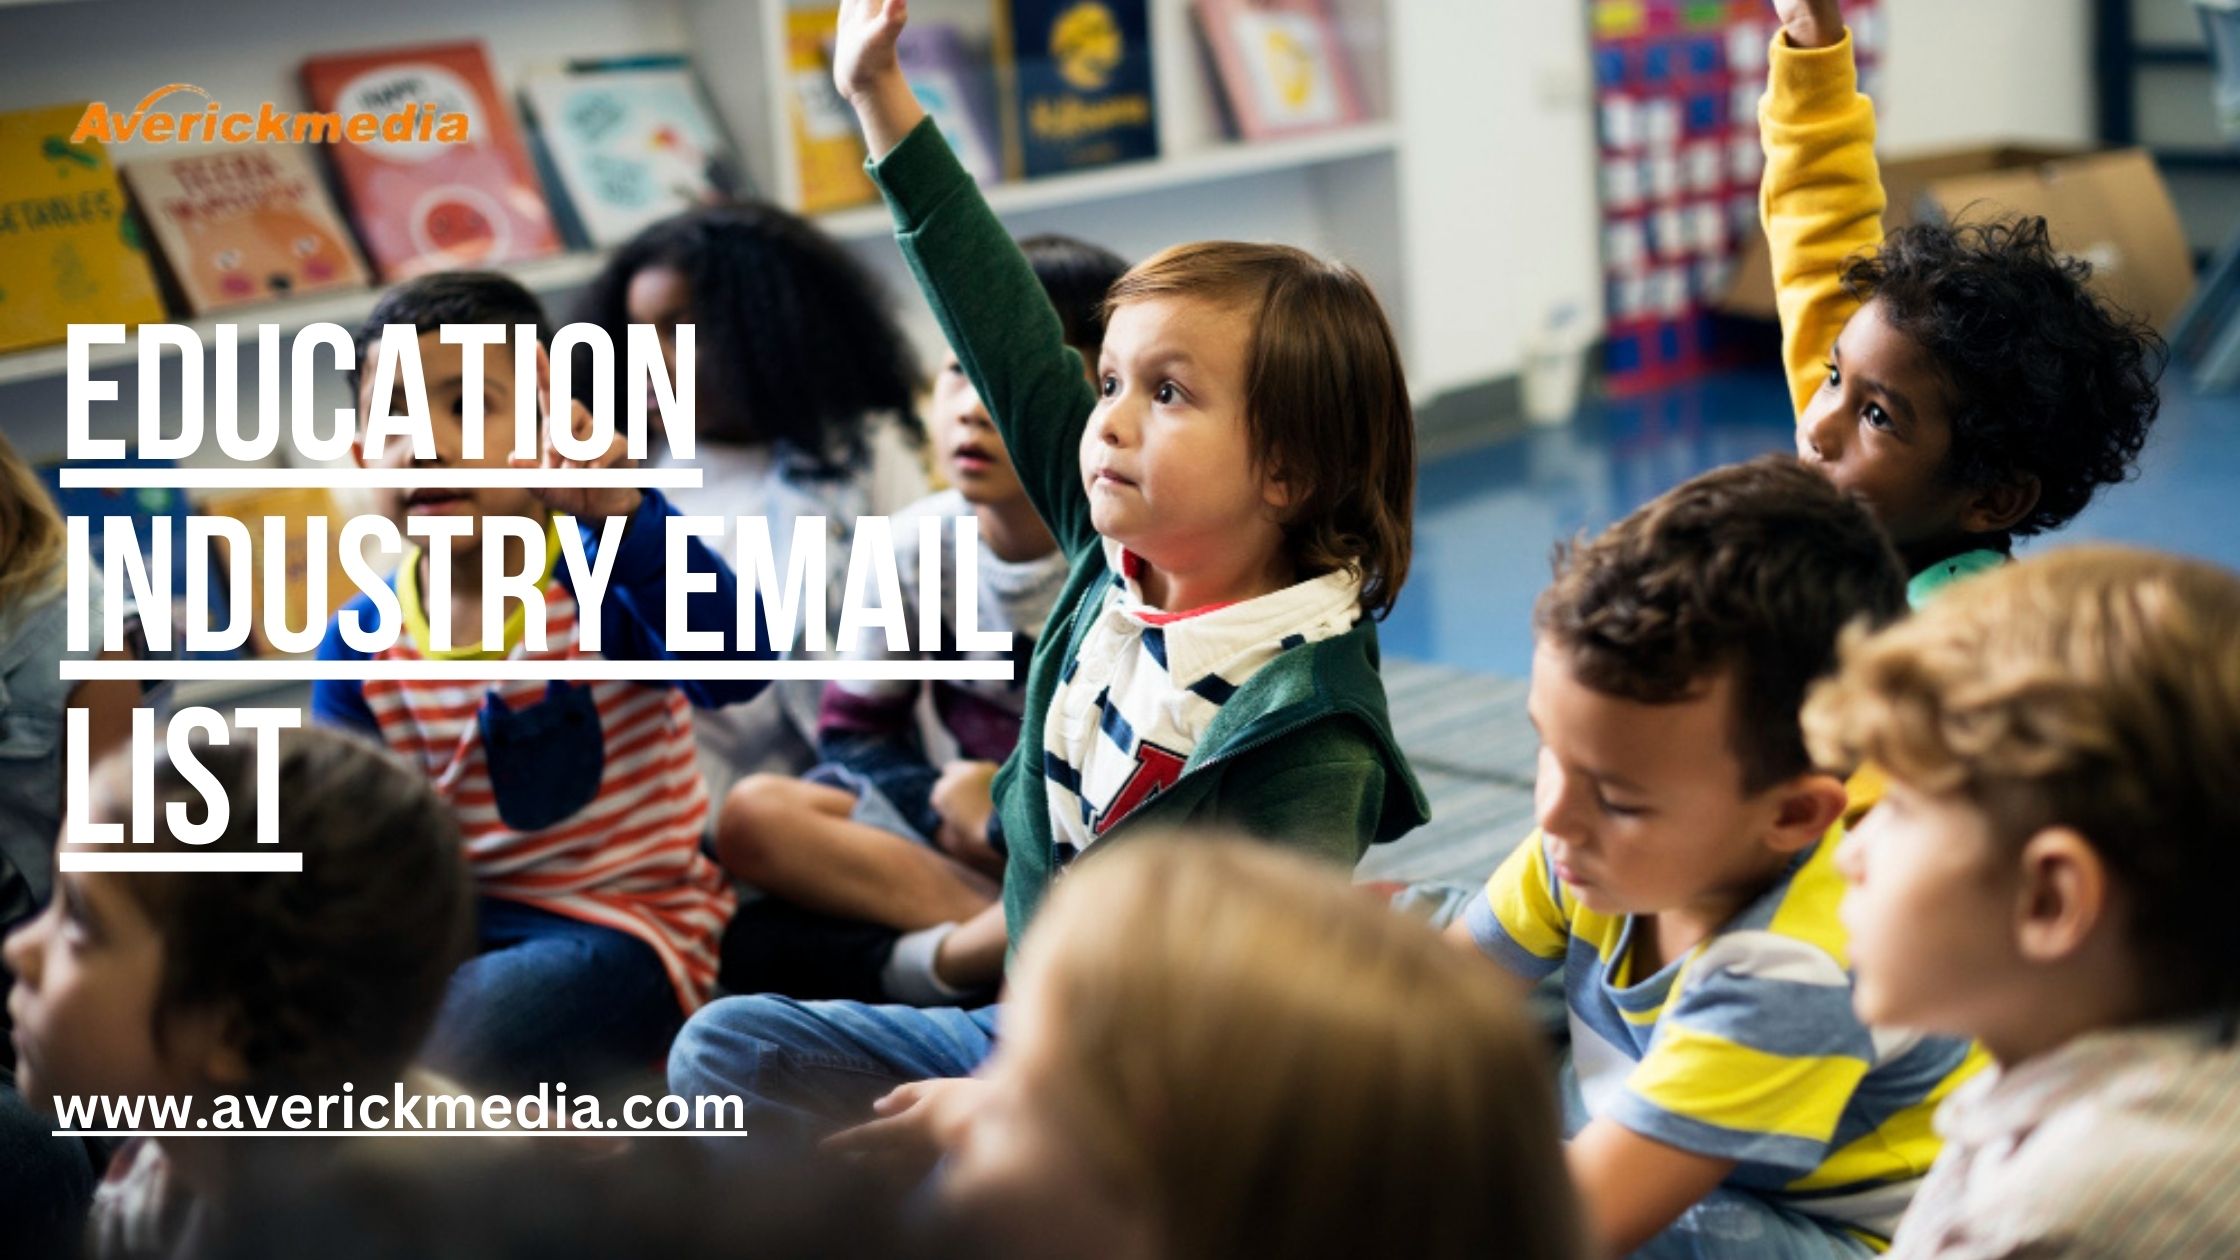 Education Industry Email List - 100% verified data